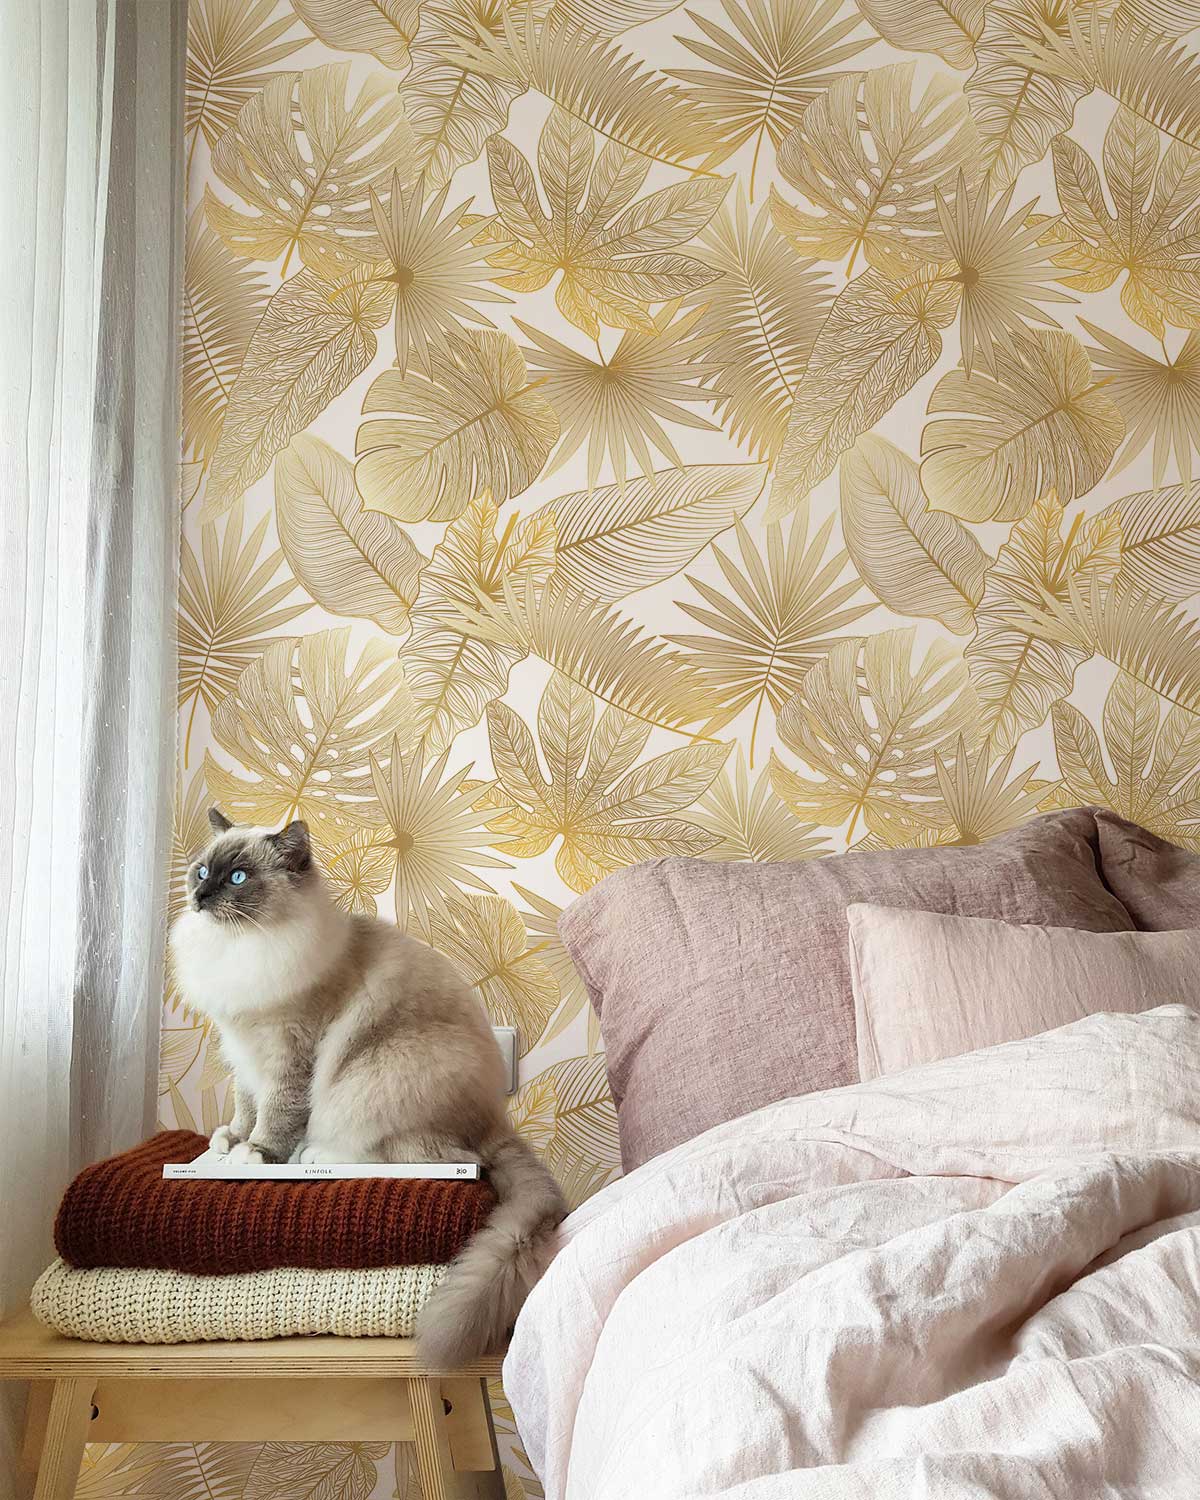 a creative wallpaper decoration idea with custom-made leaves